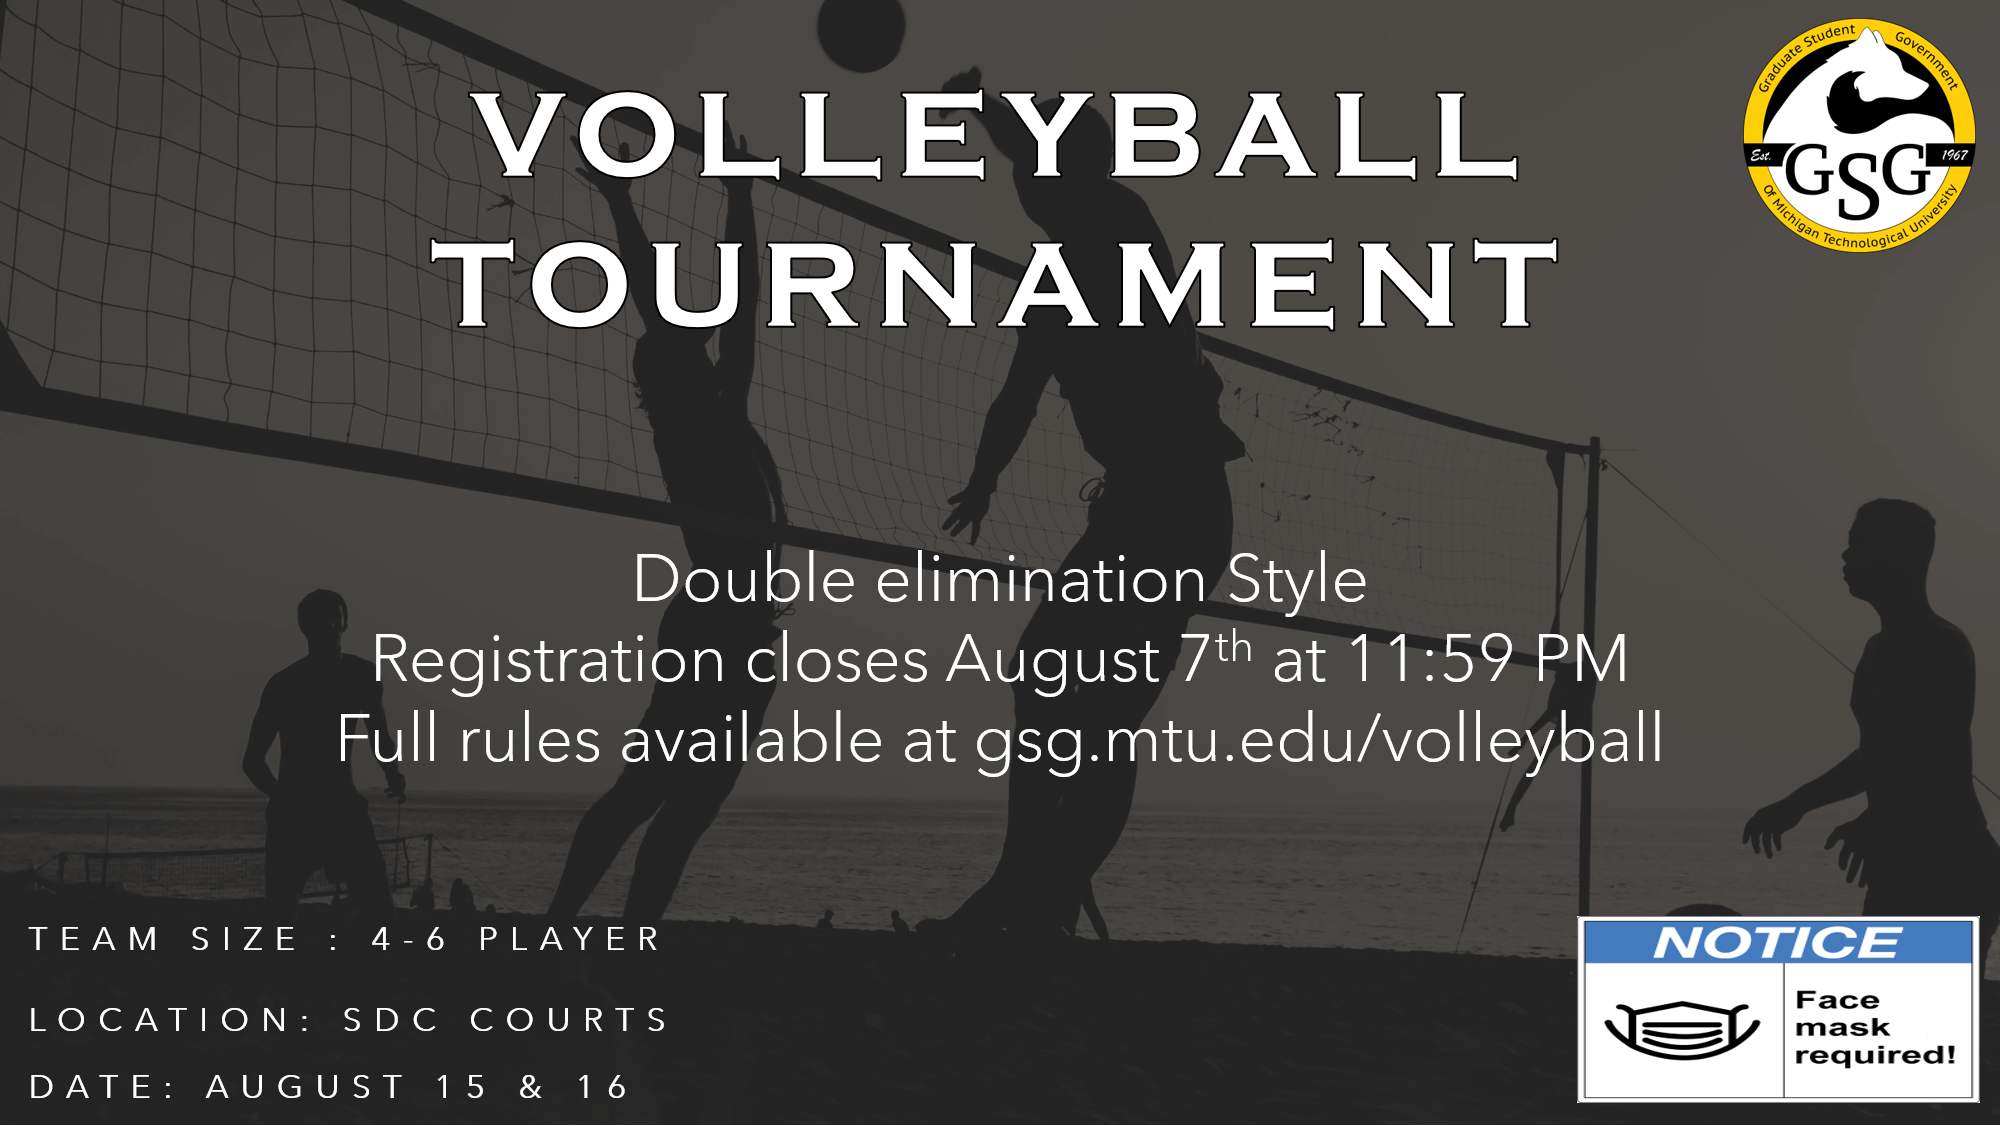 Summer 2020 Volleyball Tournament – Graduate Student Government